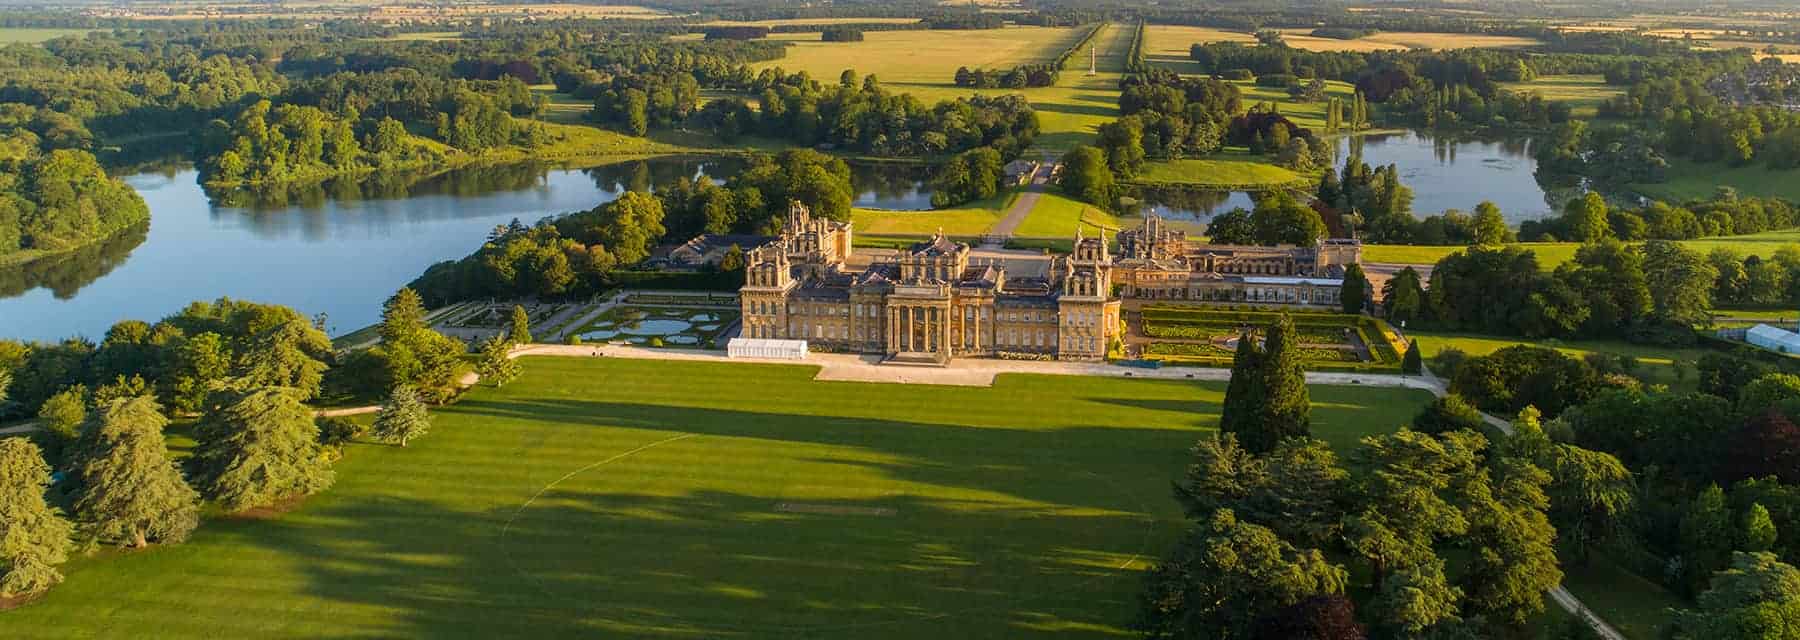 aerial view of blenheim palace and surrounding gardens 